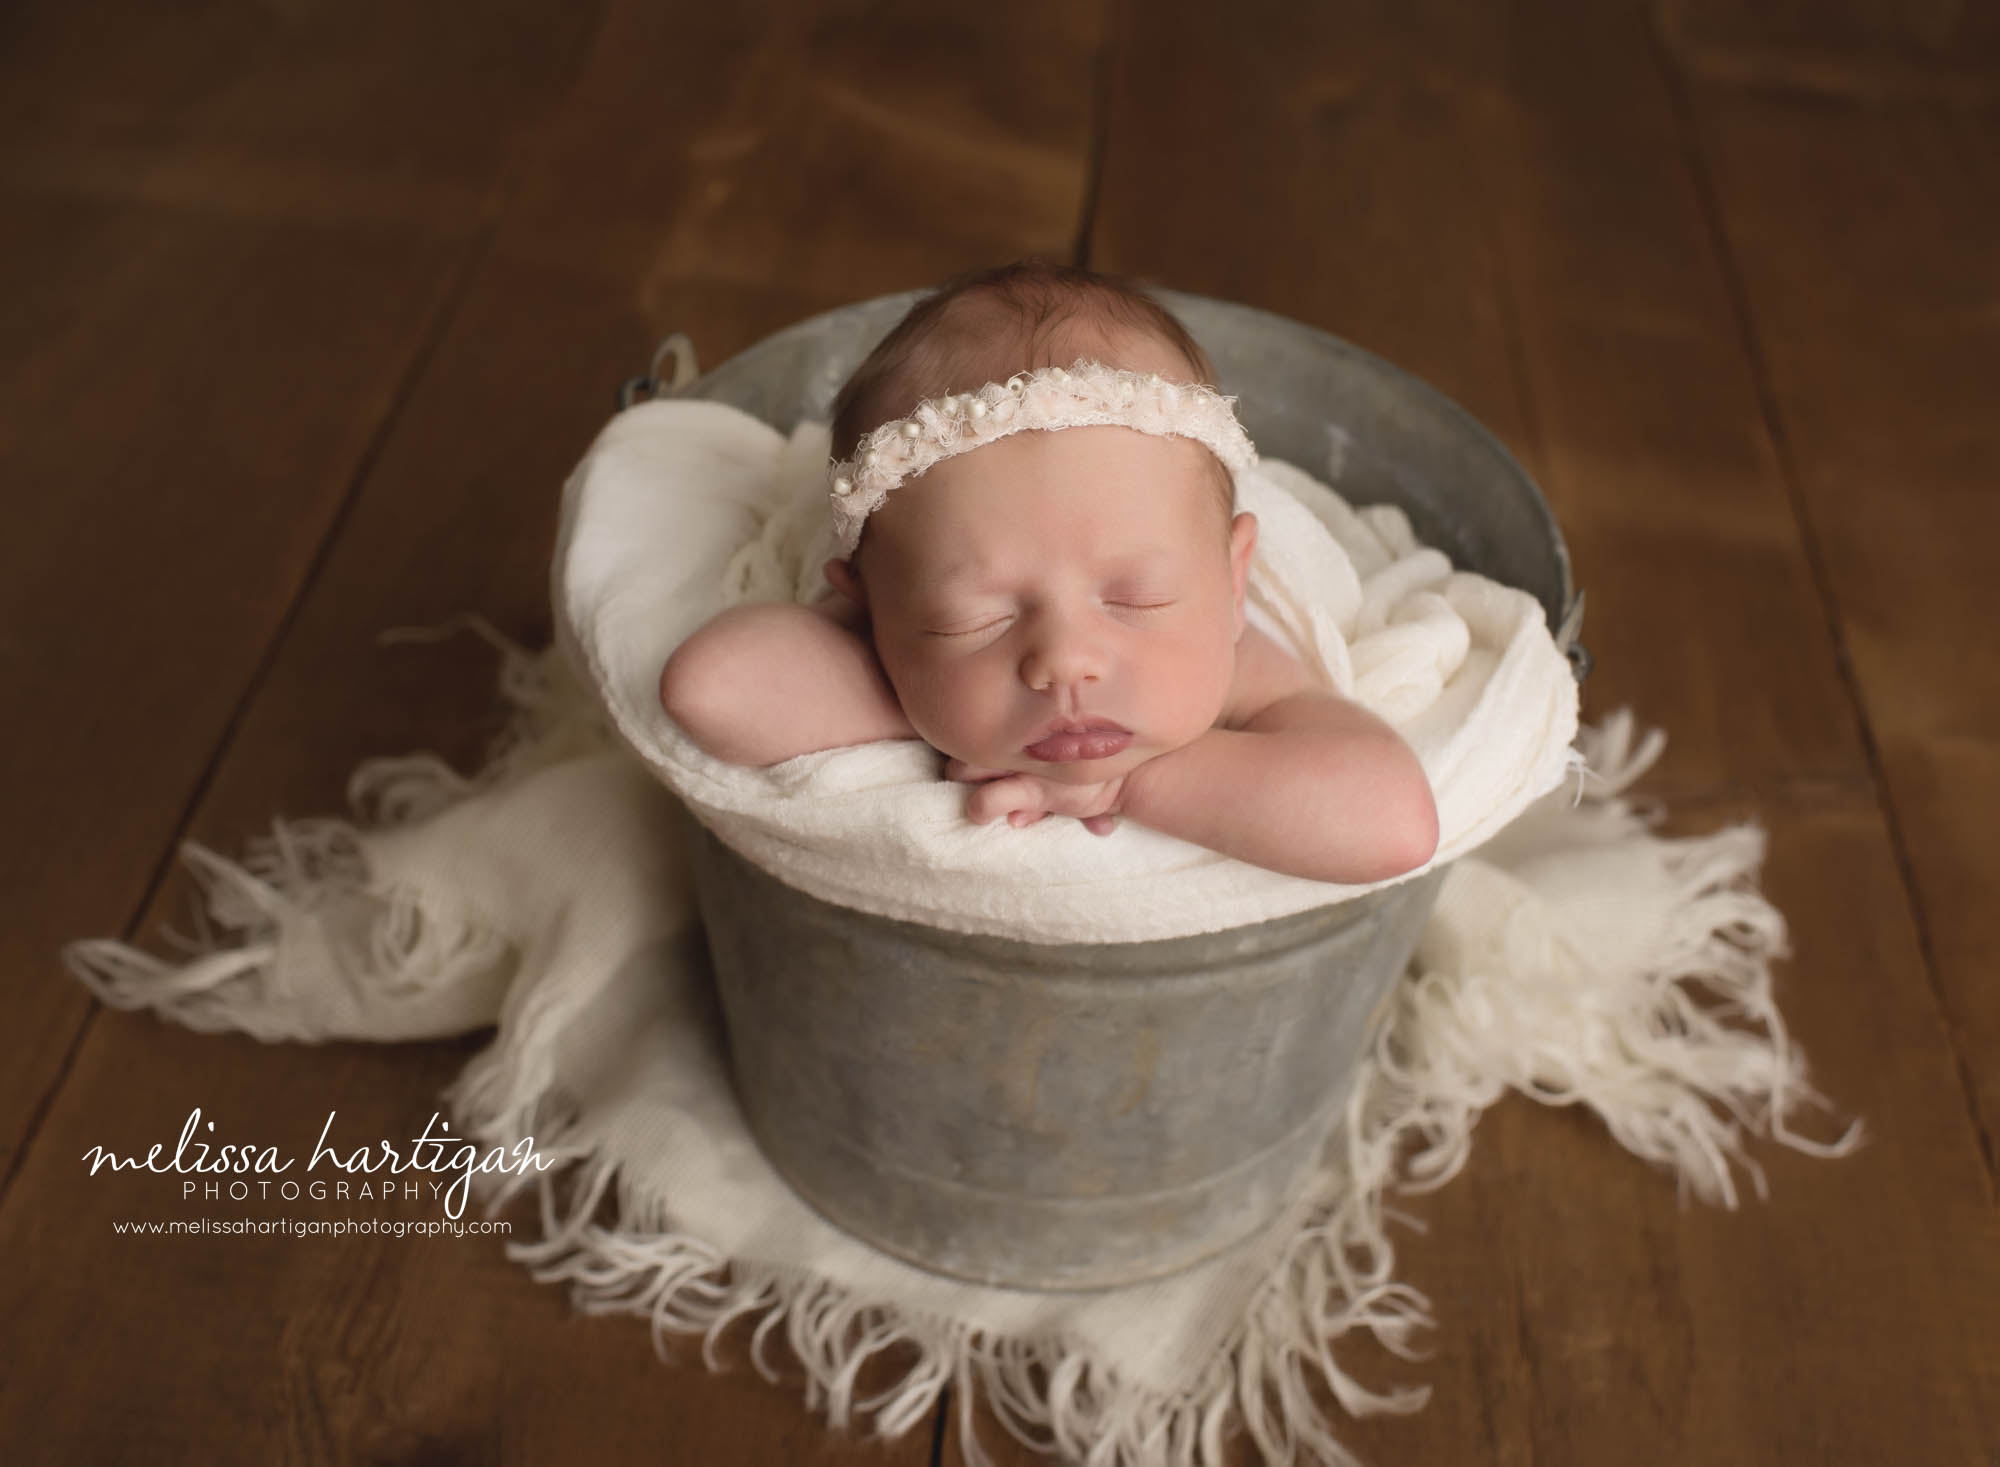 sleeping baby girl posed in metal bucket with cream lay and cream colored headband